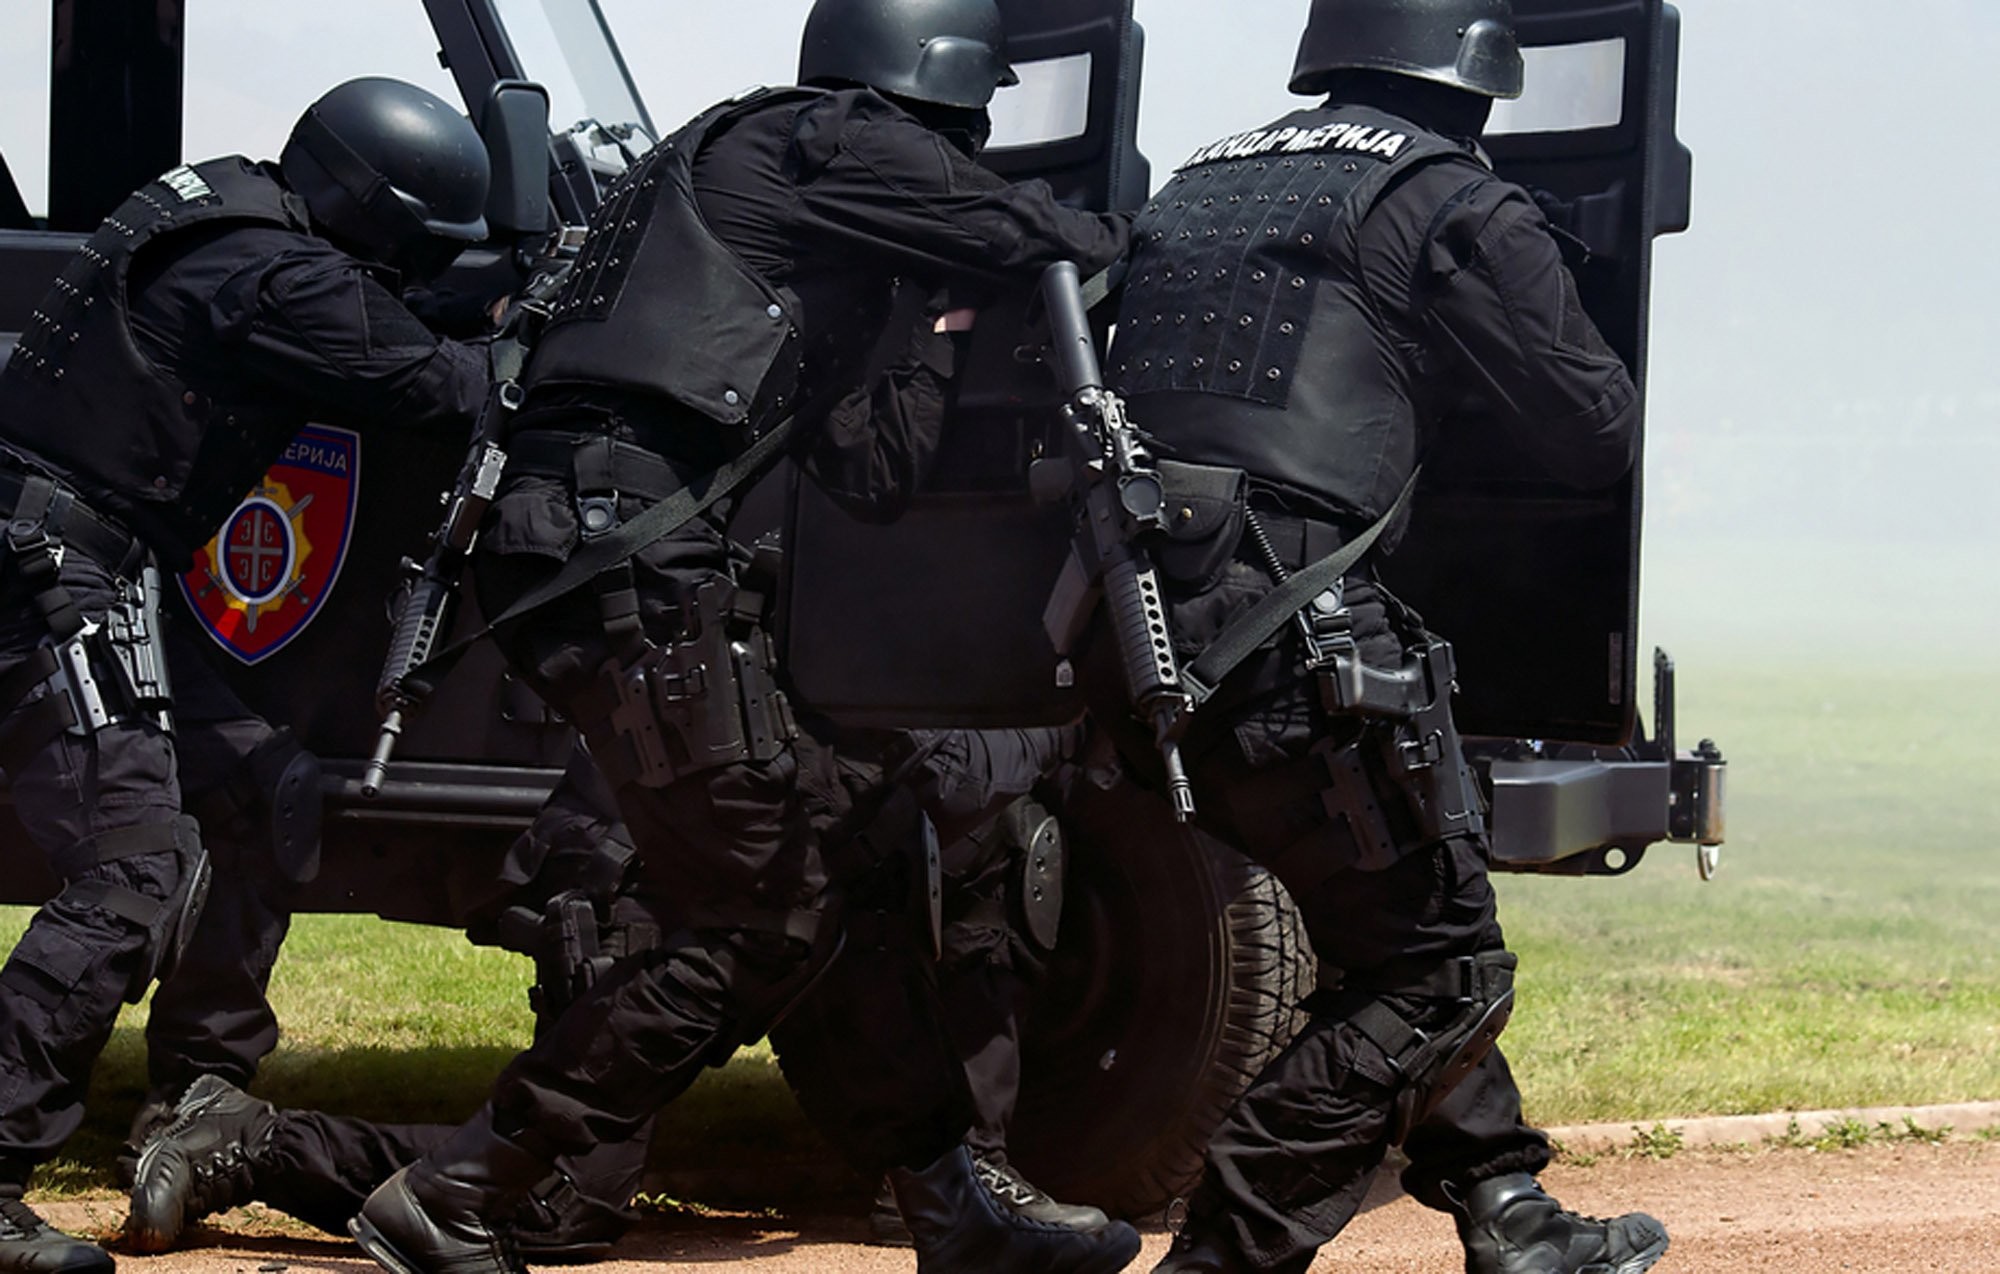 2000x1274 Swat Team In Action Wallpapers On Wallpaper 1080p HD